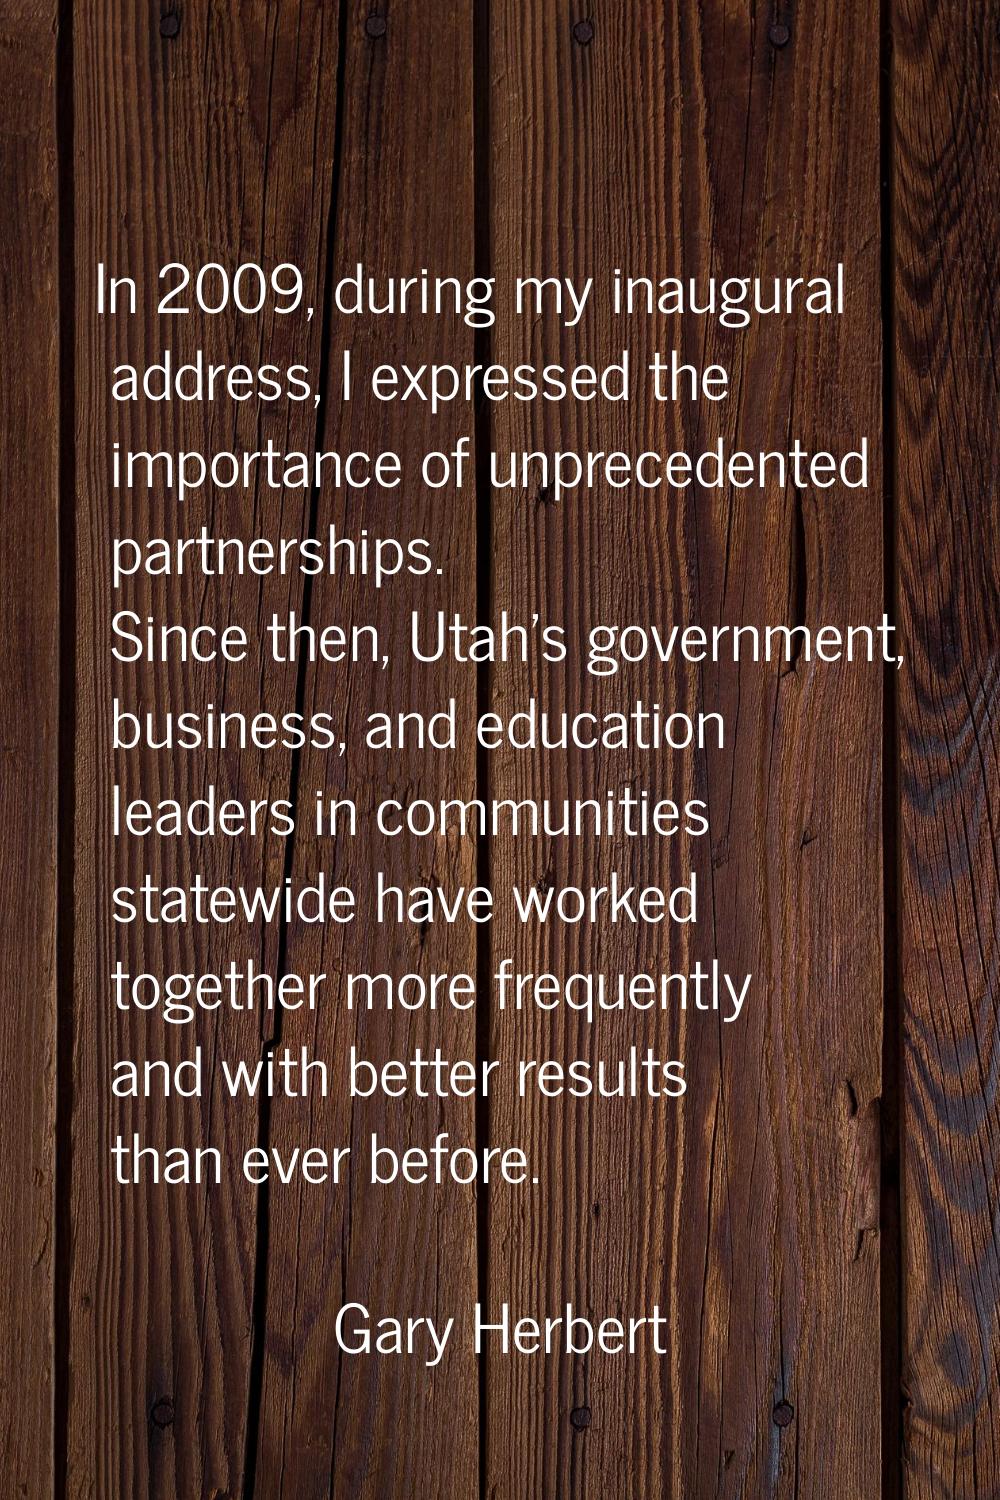 In 2009, during my inaugural address, I expressed the importance of unprecedented partnerships. Sin